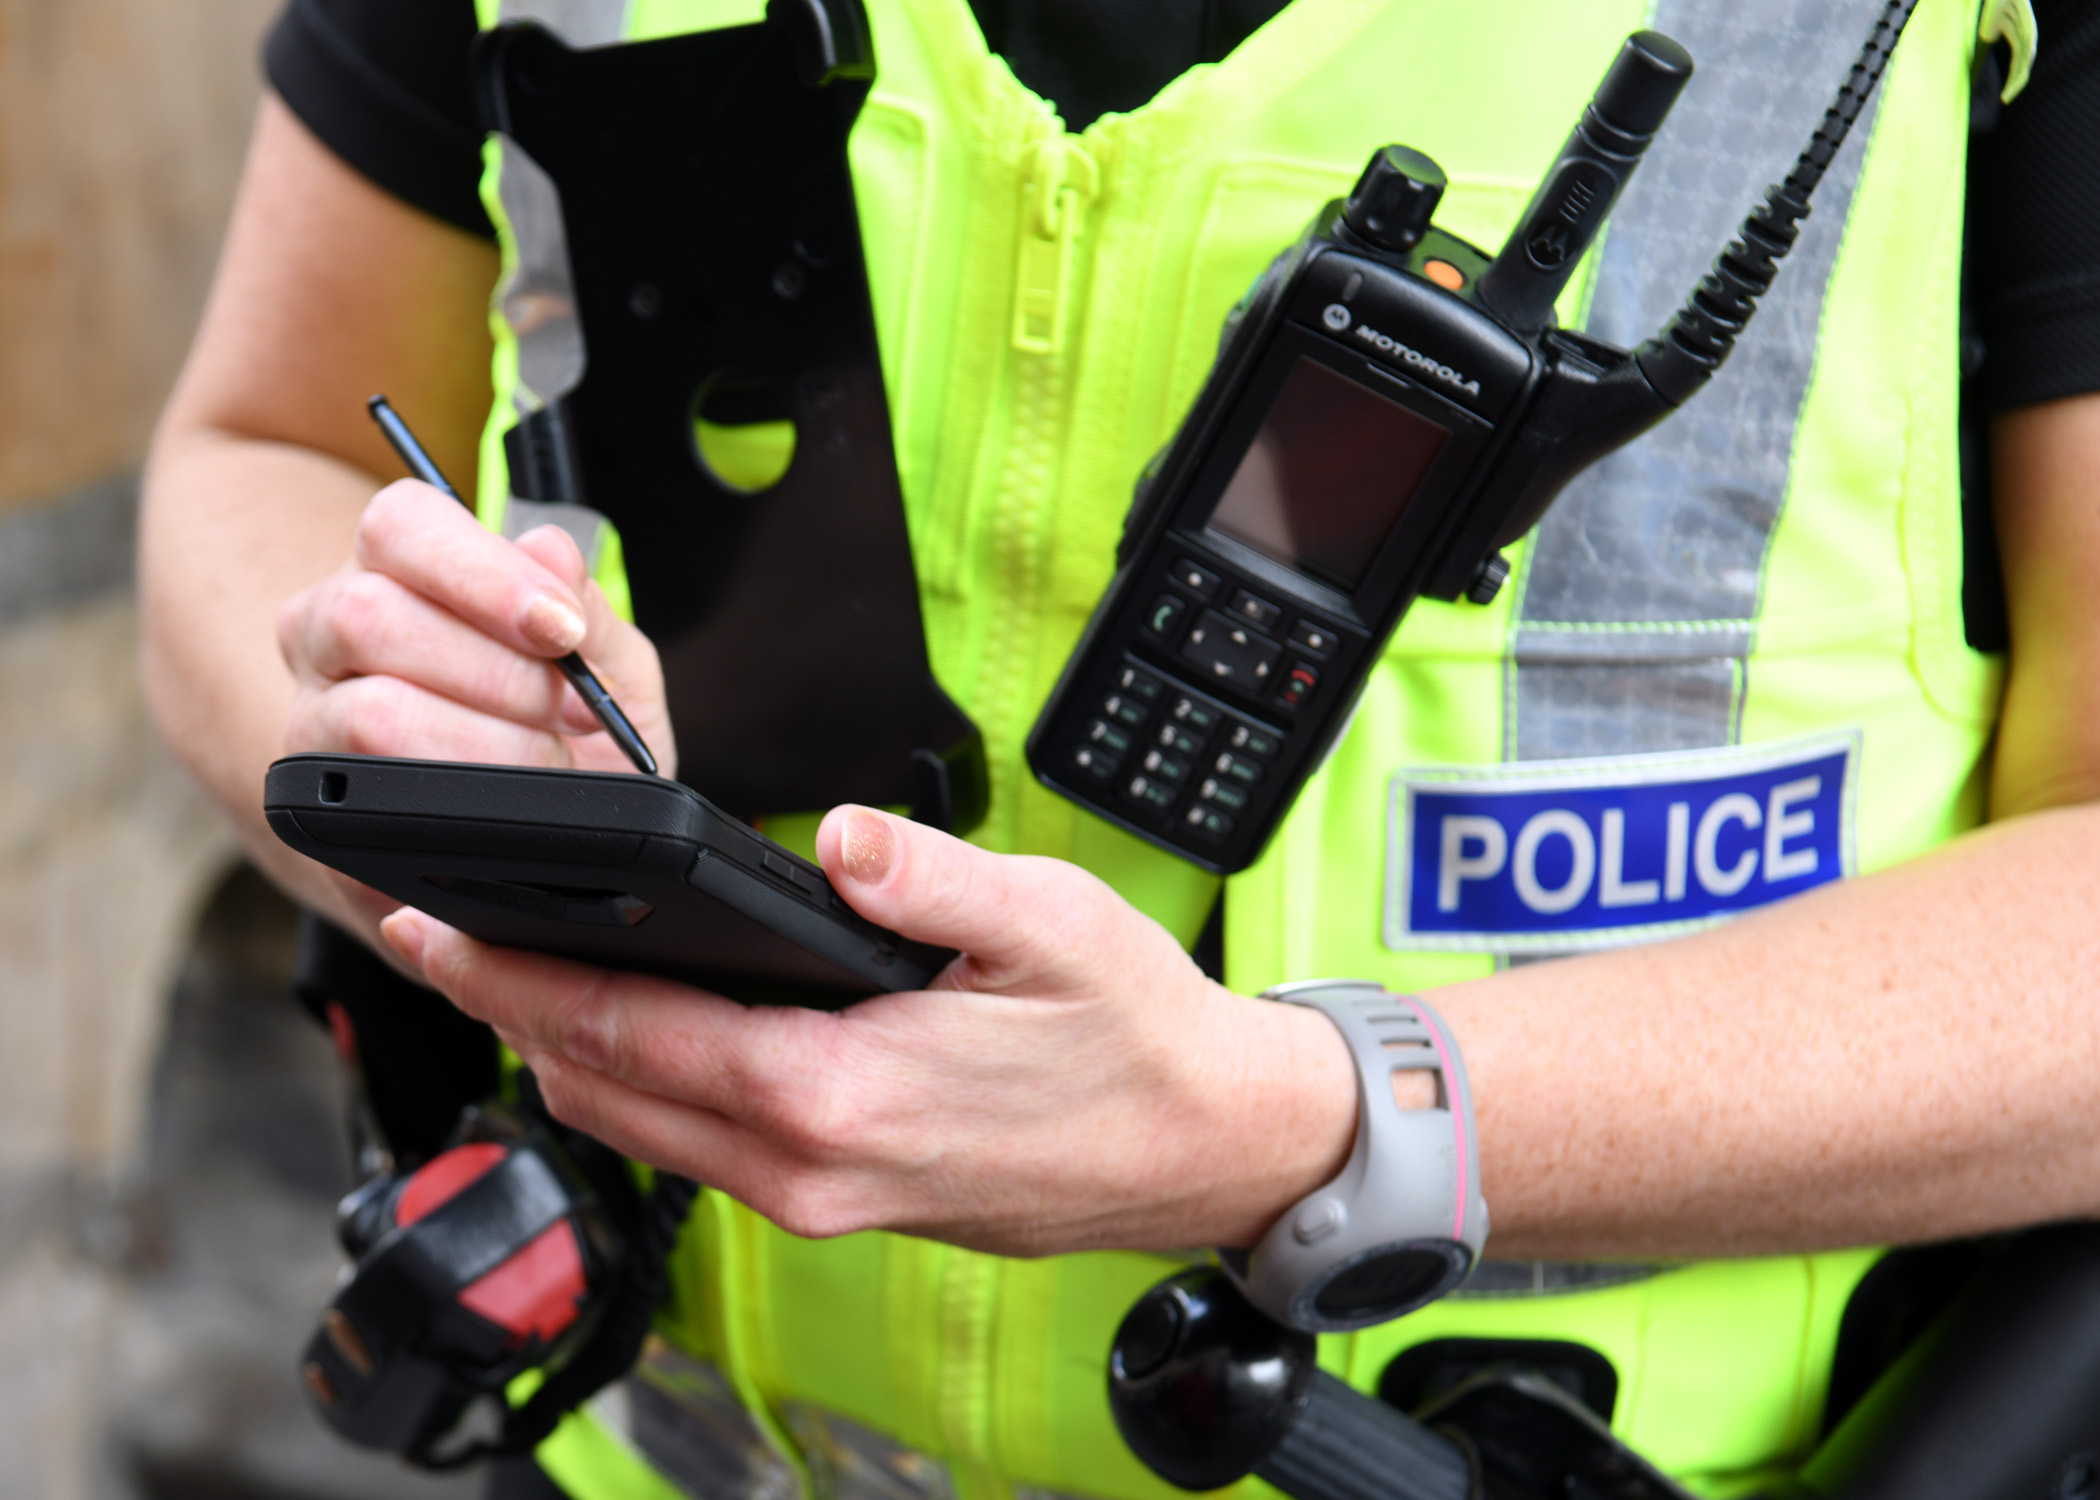 Positive impact for police officers equipped with mobile devices